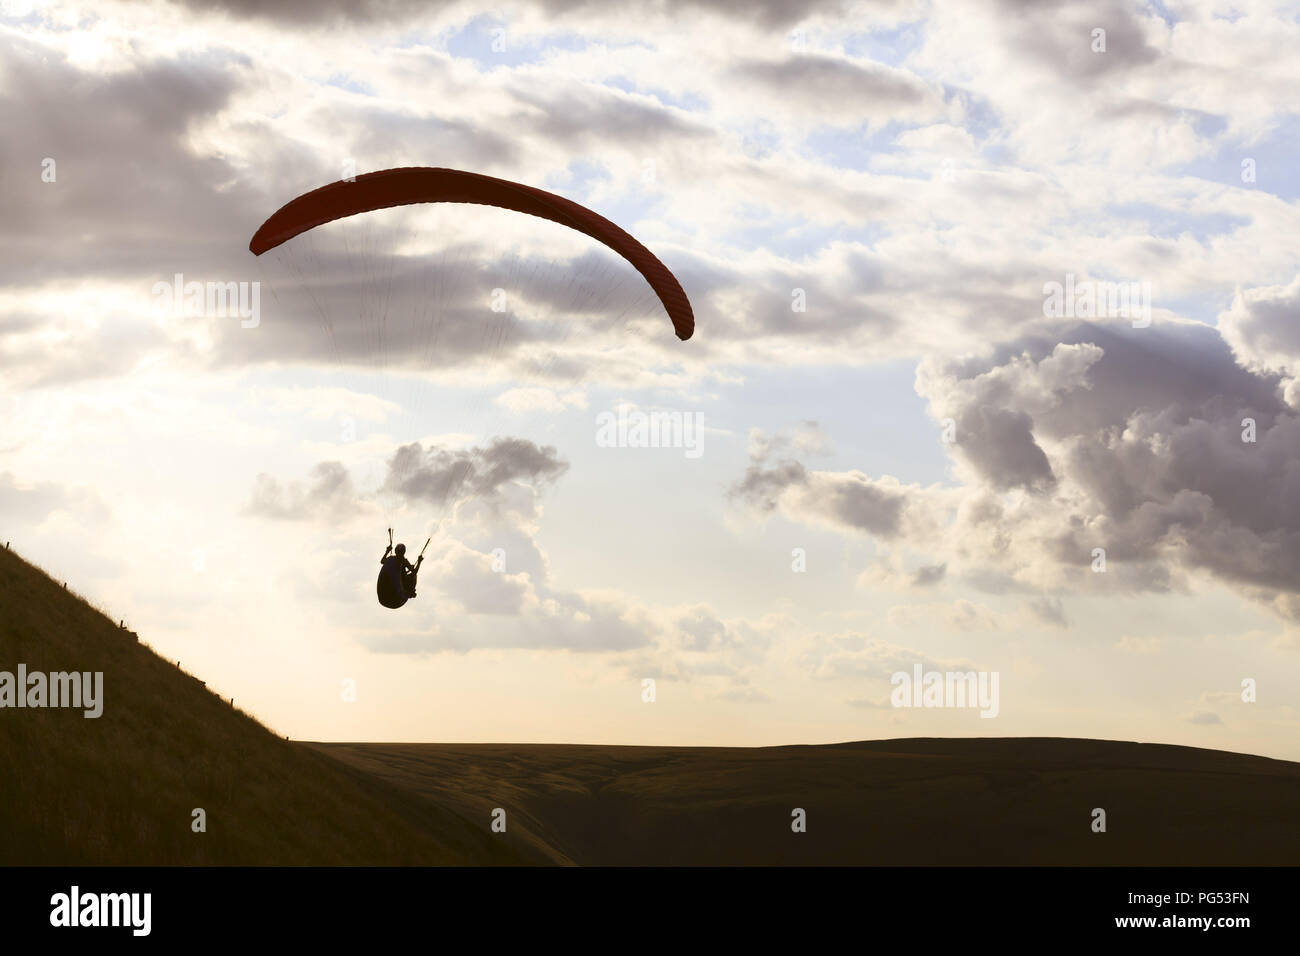 A paraglider is silhouetted against the sky over Edale Valley in the Peak District, Derbyshire. The pilots gain lift from the strong updraft that occu Stock Photo